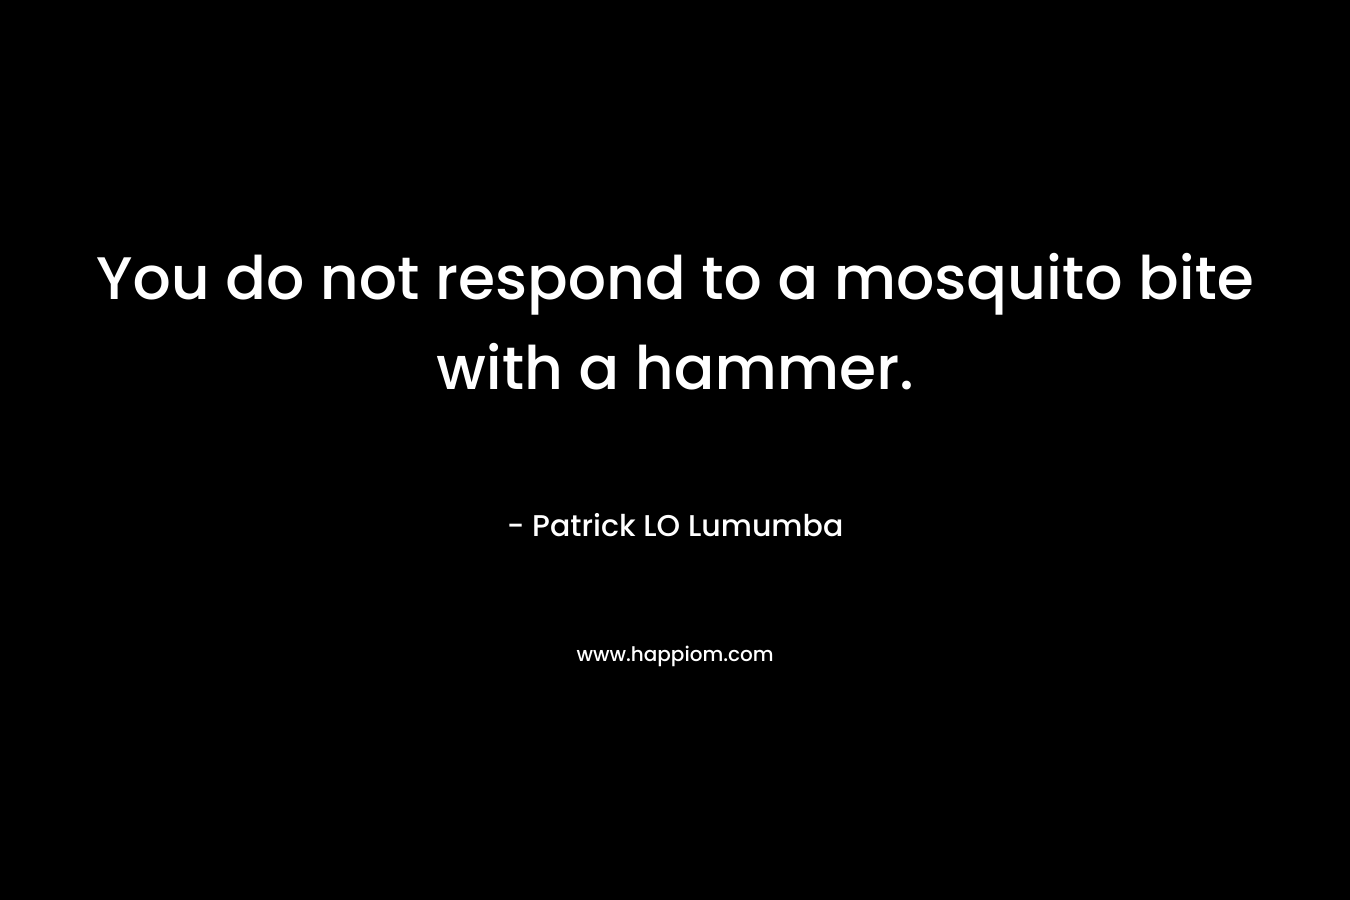 You do not respond to a mosquito bite with a hammer. – Patrick LO Lumumba